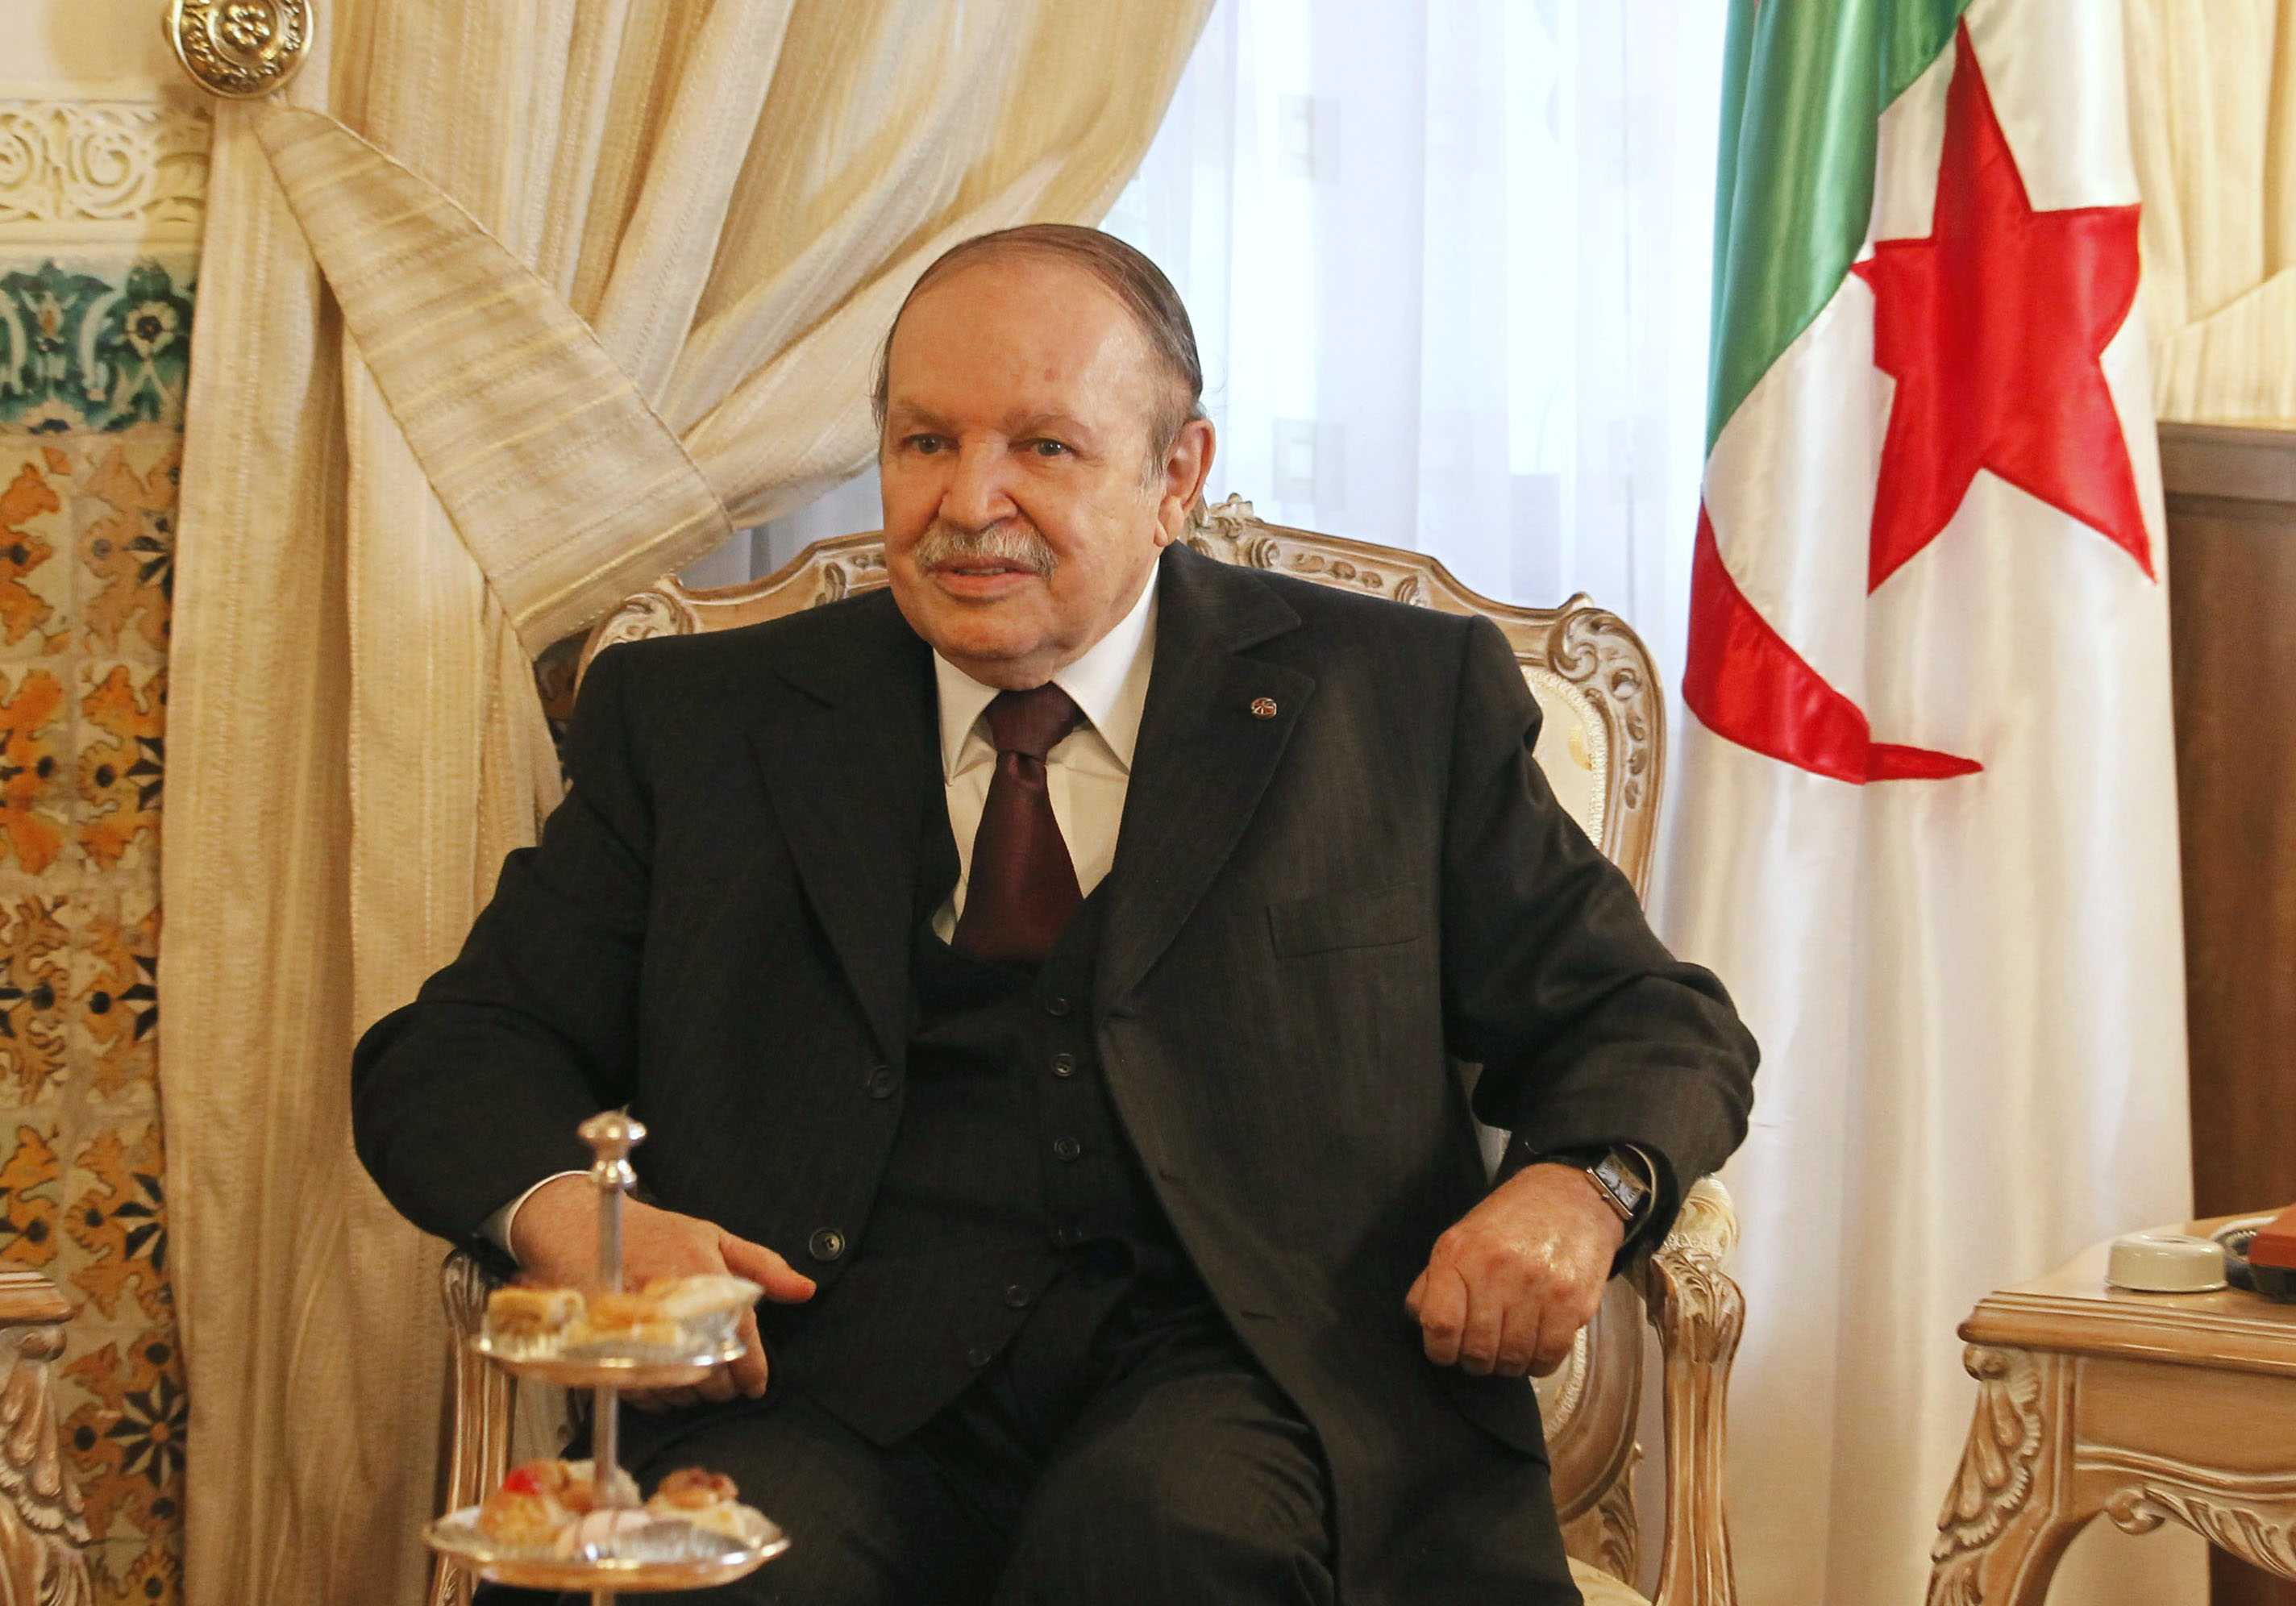 Algeria's President Abdelaziz Bouteflika speaks with Qatar's Prime Minister Sheikh Hamad bin Jassim al-Thani (not pictured) during their meeting at the Presidential Palace in Algiers September 11, 2012. REUTERS/Louafi Larbi /File Photo